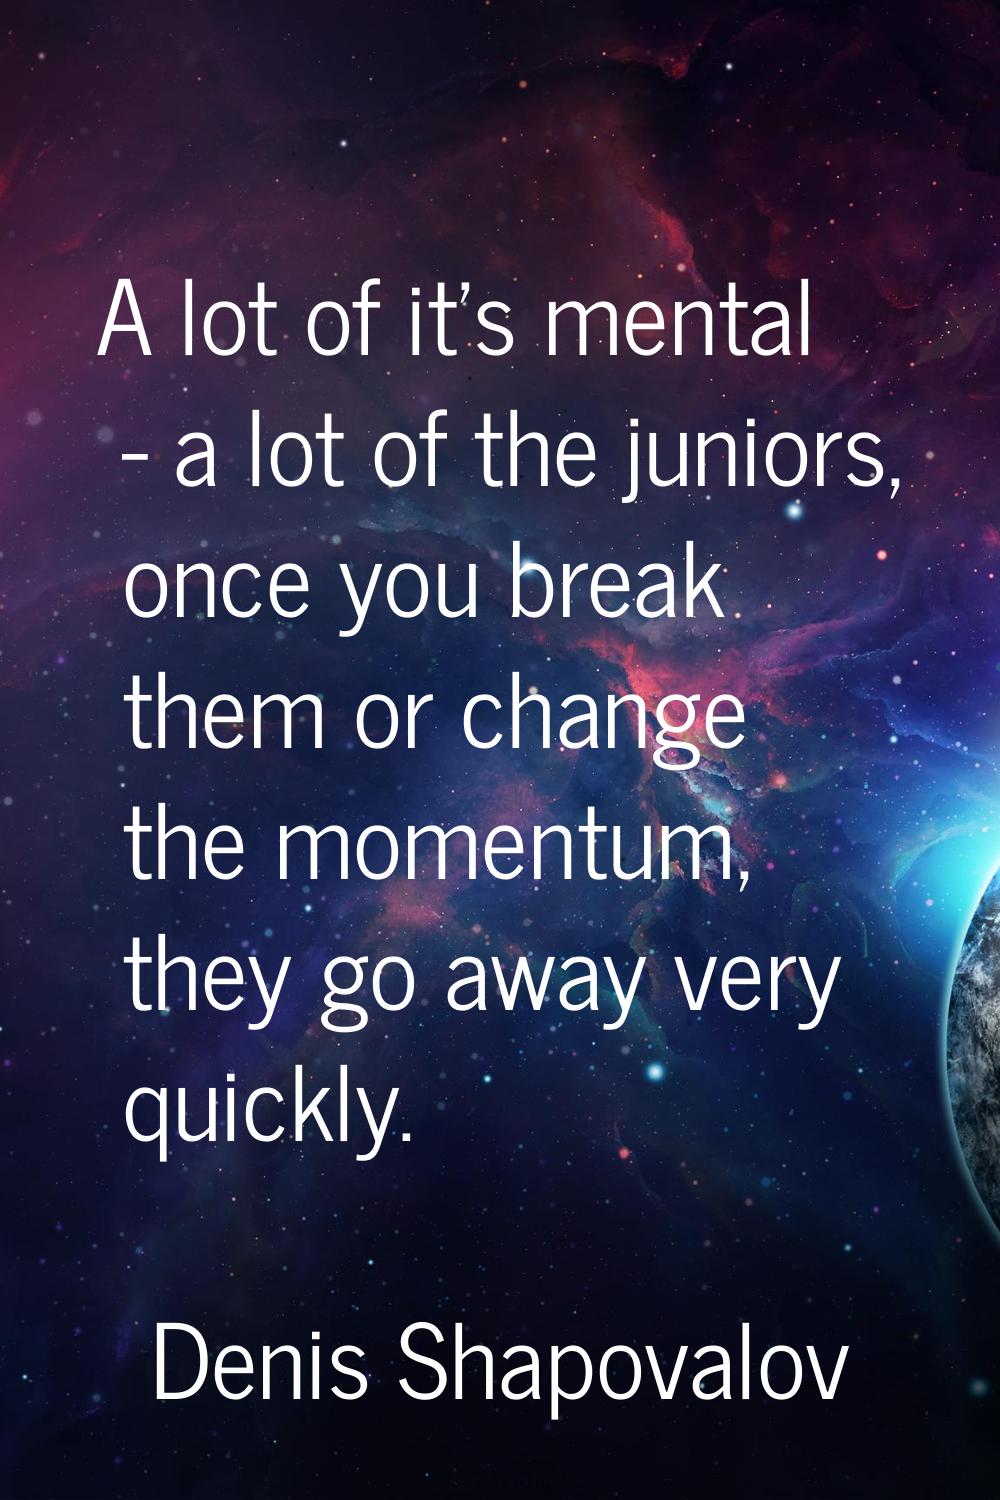 A lot of it's mental - a lot of the juniors, once you break them or change the momentum, they go aw